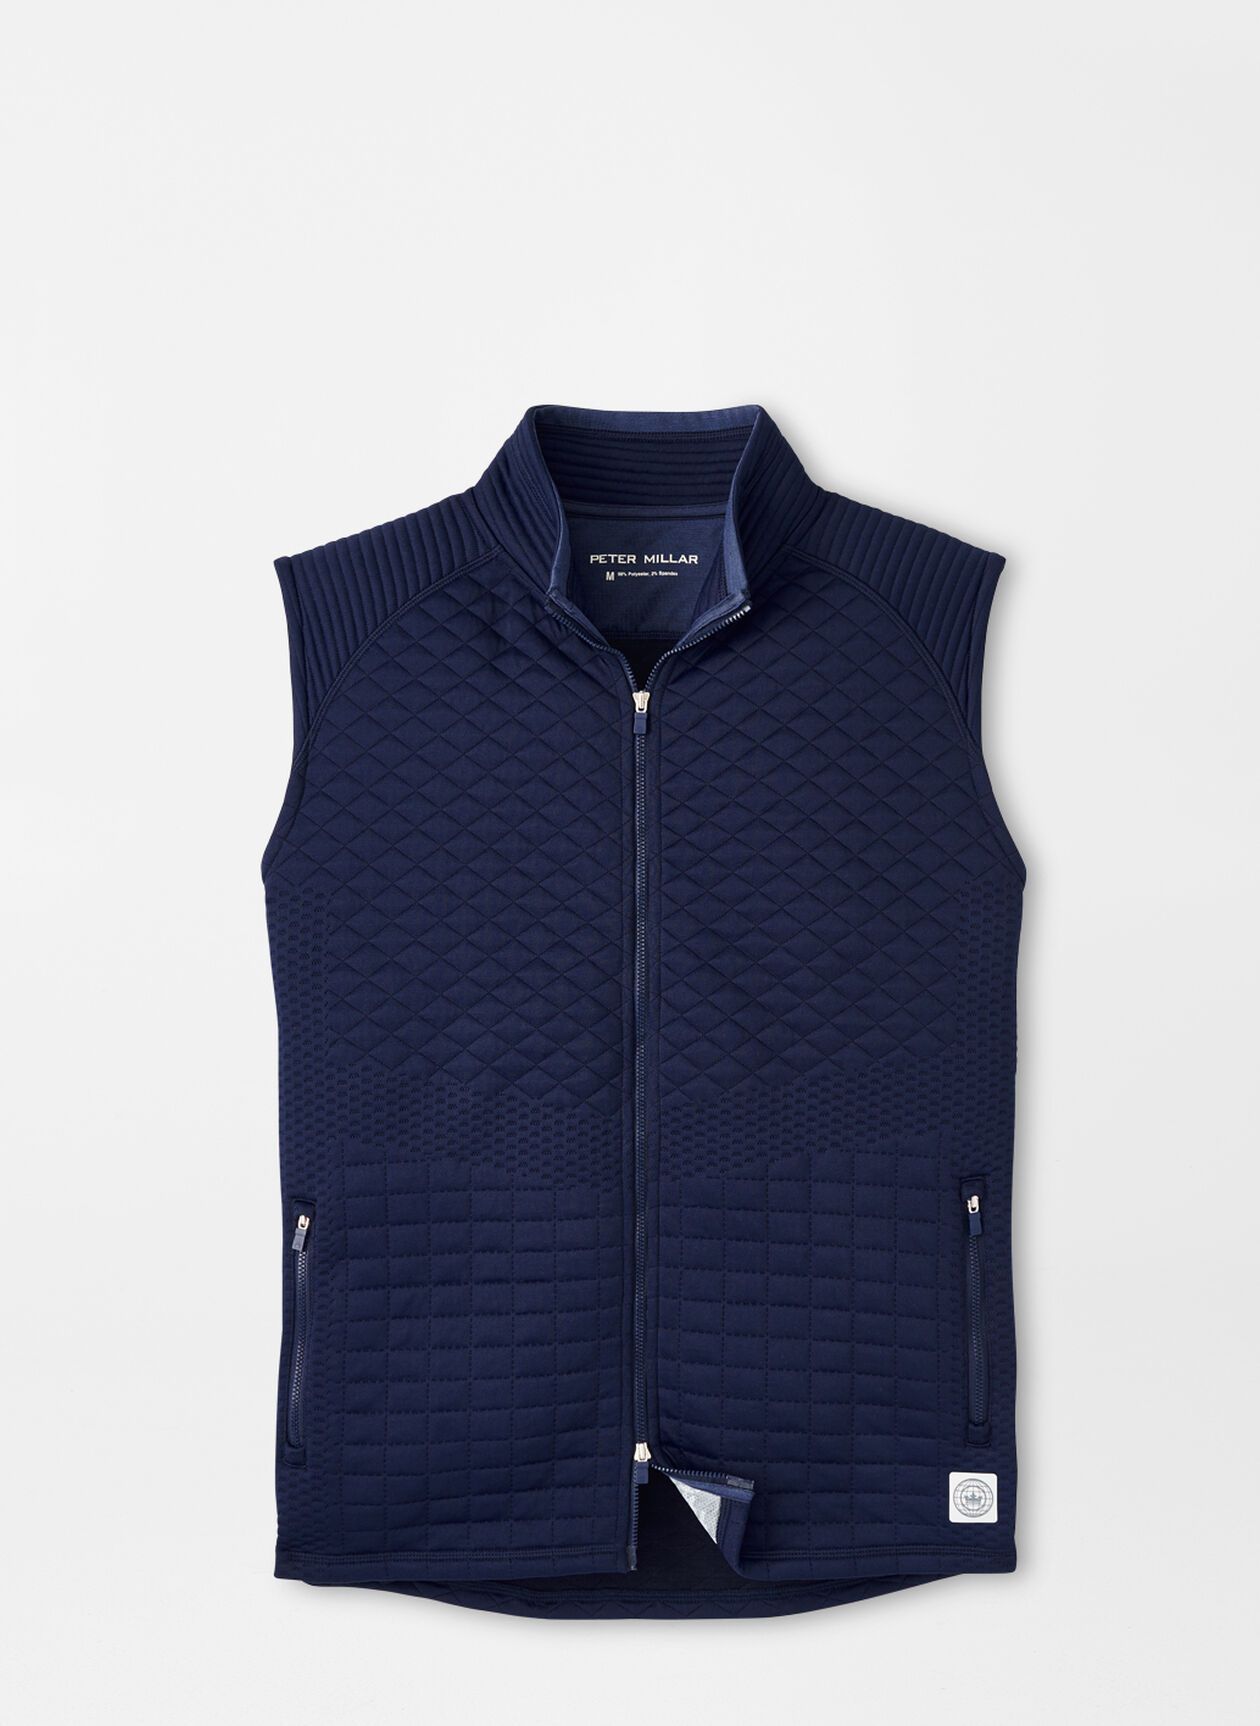 Orion Performance Quilted Vest | Peter Millar